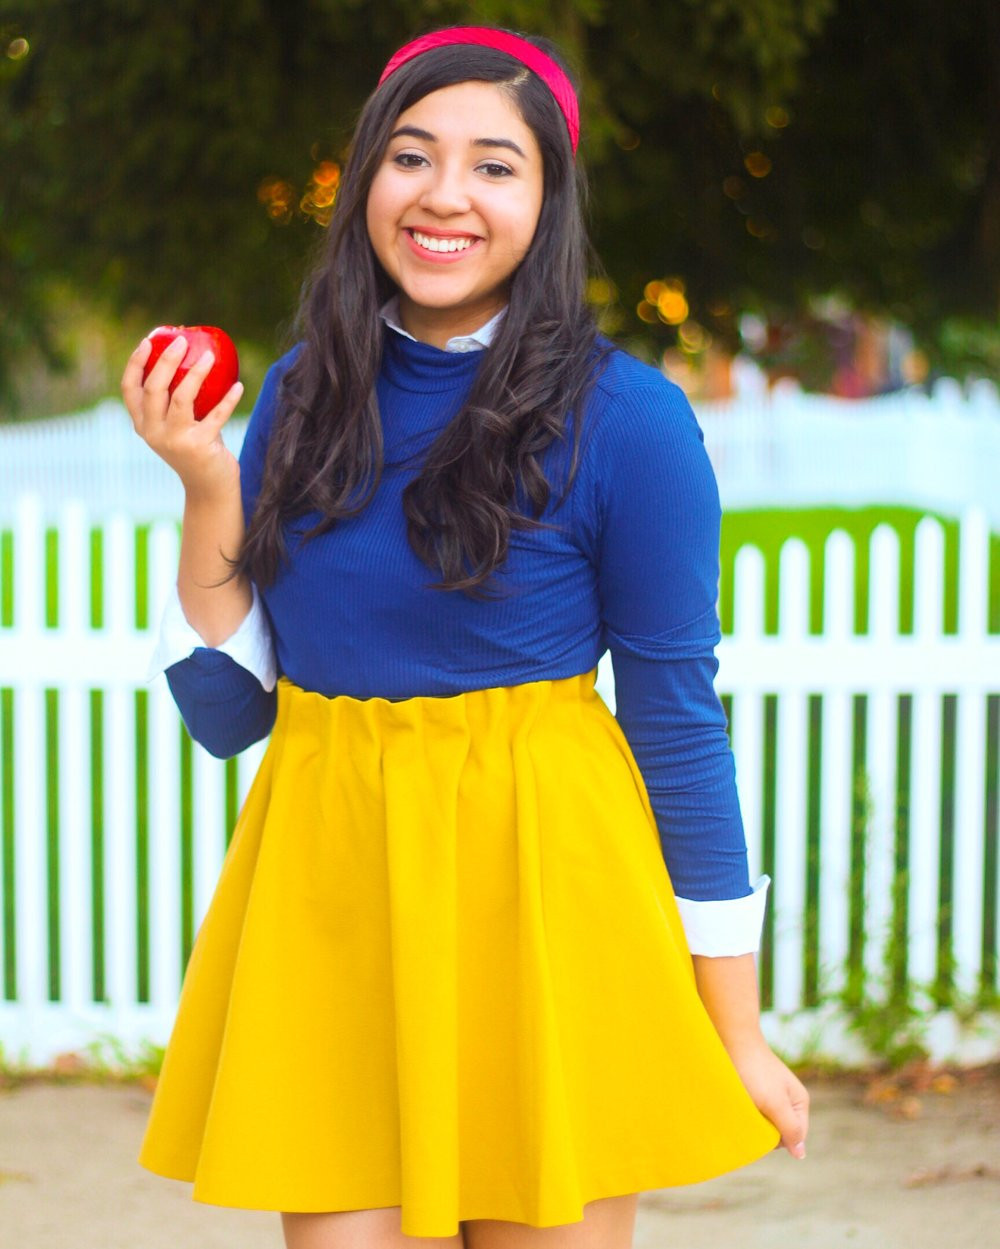 The 20 Best Ideas for Snow White Costume Adults Diy - Home, Family ...